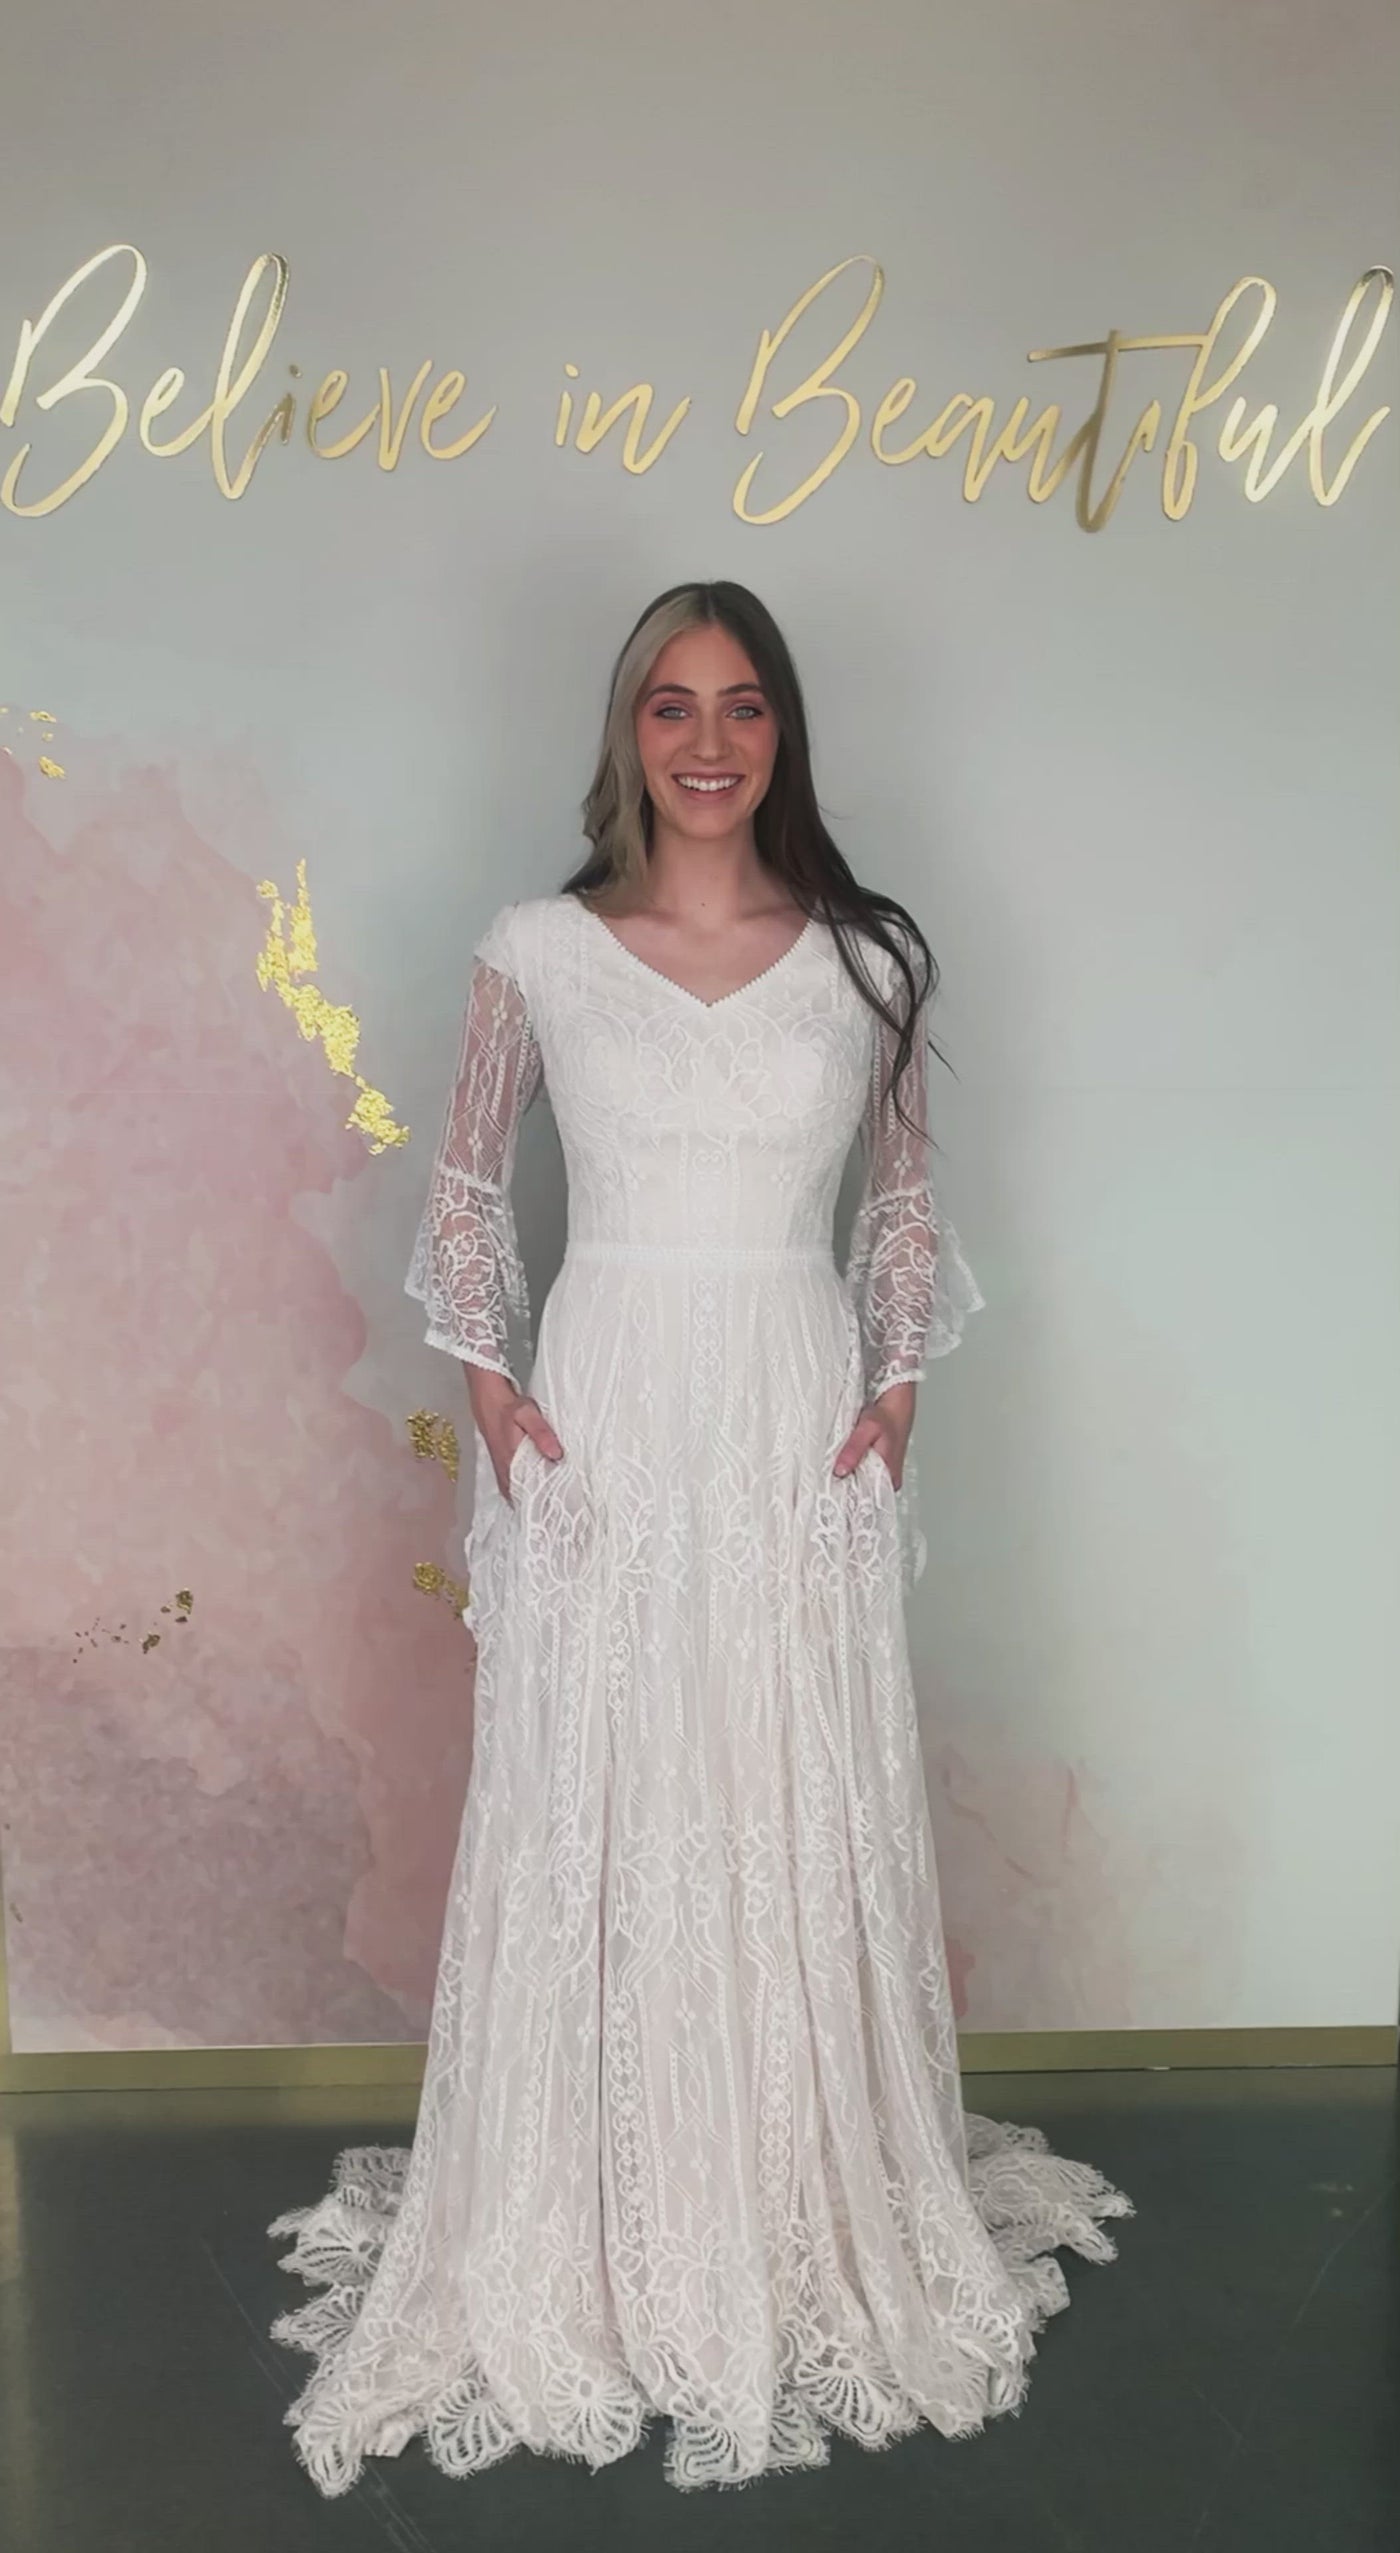 A video featuring our Arwen wedding dress with its full lace A-line skirt, whimsical bell sleeves, and eyelash lace detailing at the hem.